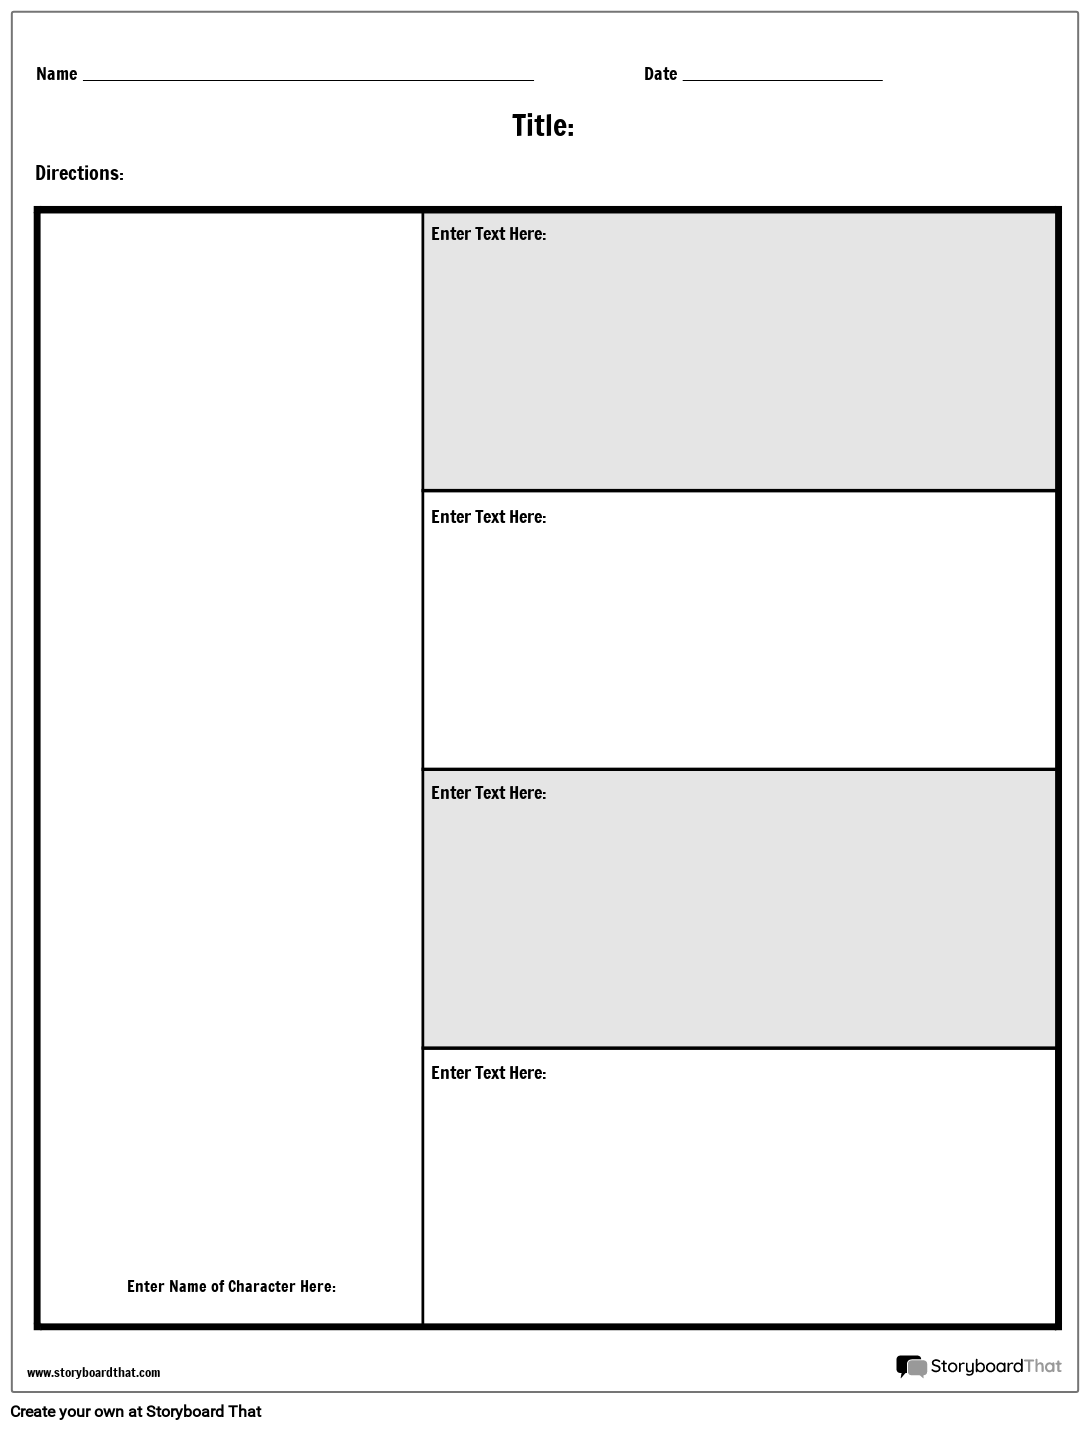 Character Chart 4 Questions Storyboard by worksheettemplates